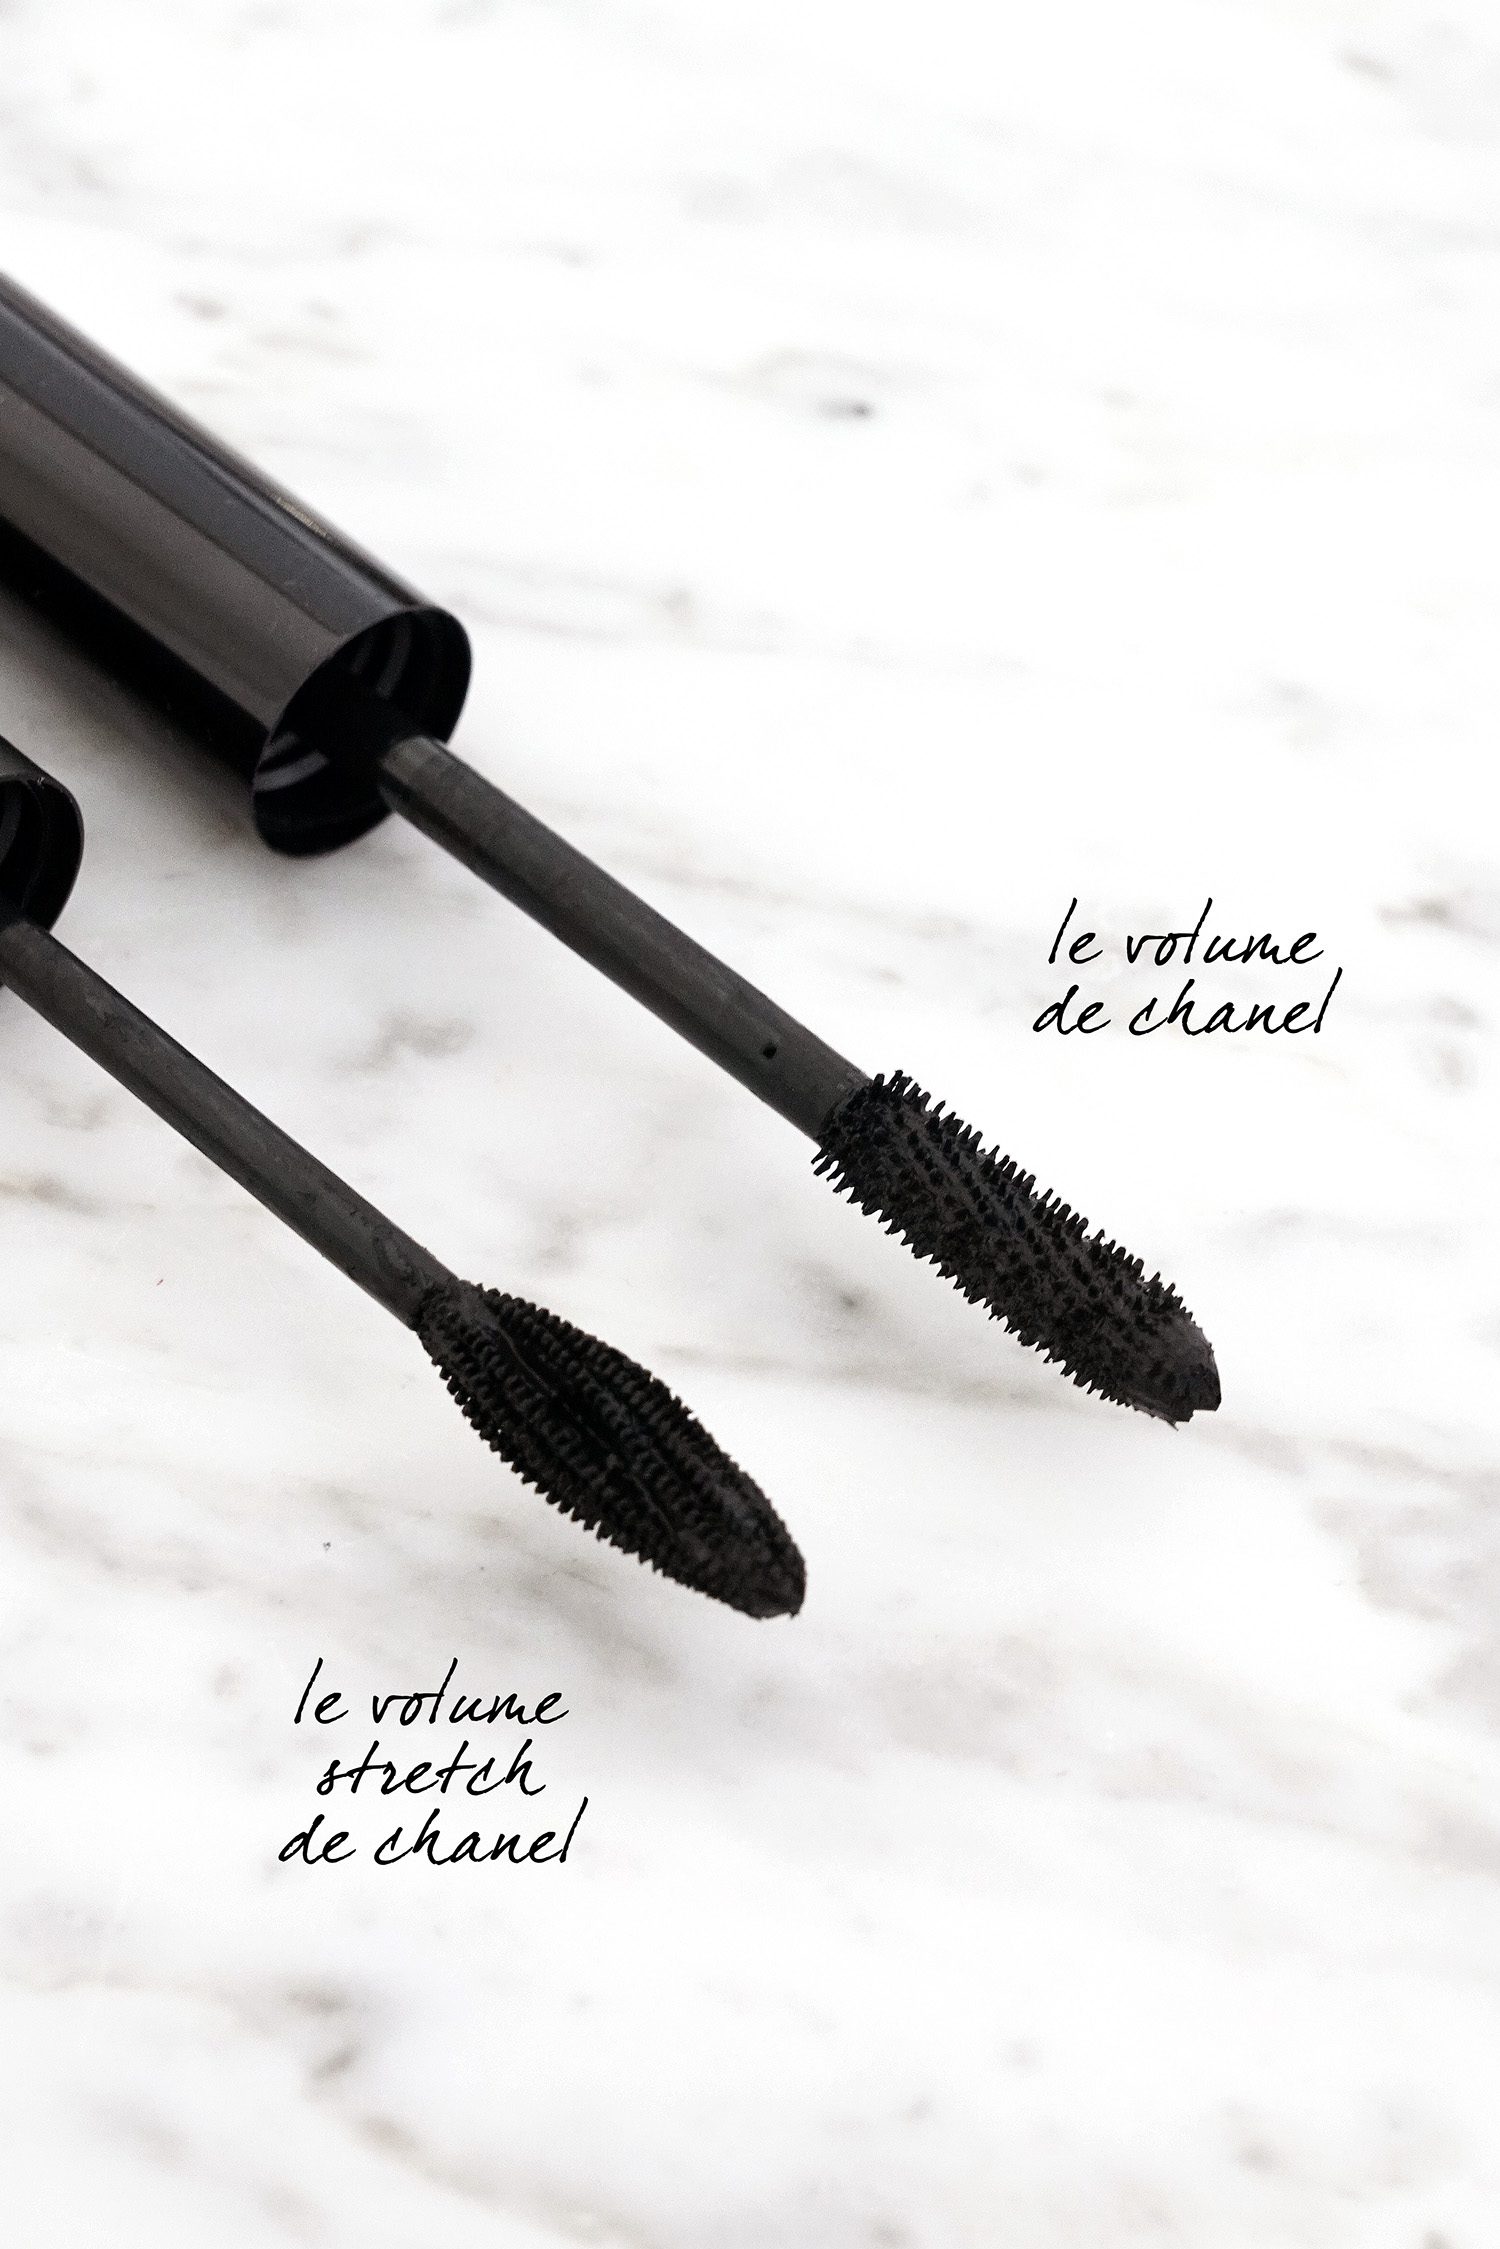 Chanel Eye Collection - New Stretch Mascara, Liquid Liner + Brow